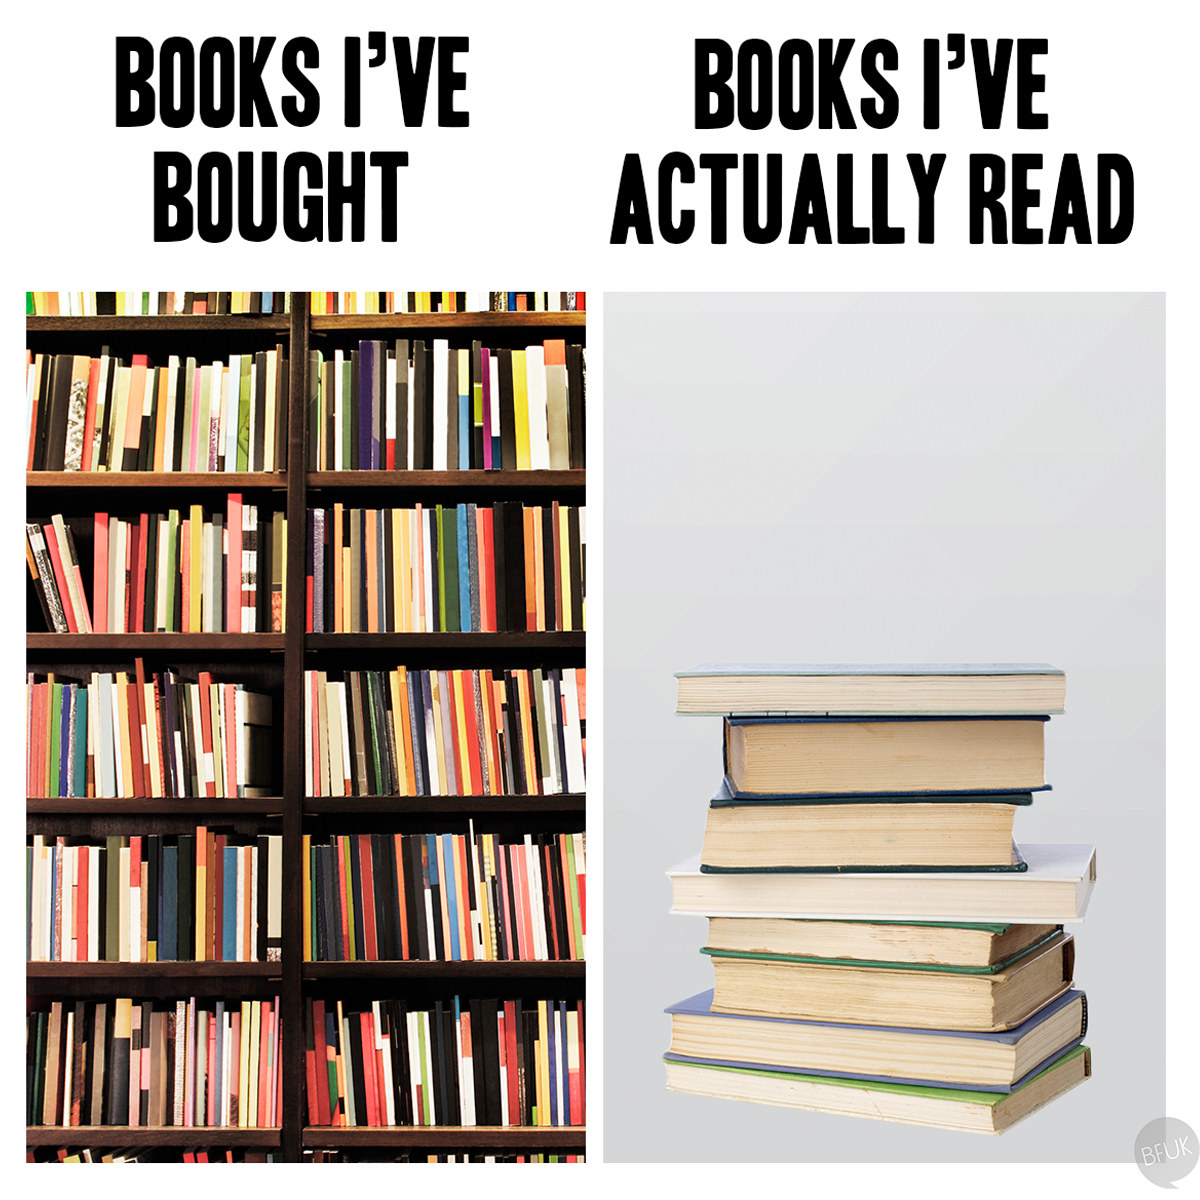 #bookmemes Who can relate? #welovebooks #litring